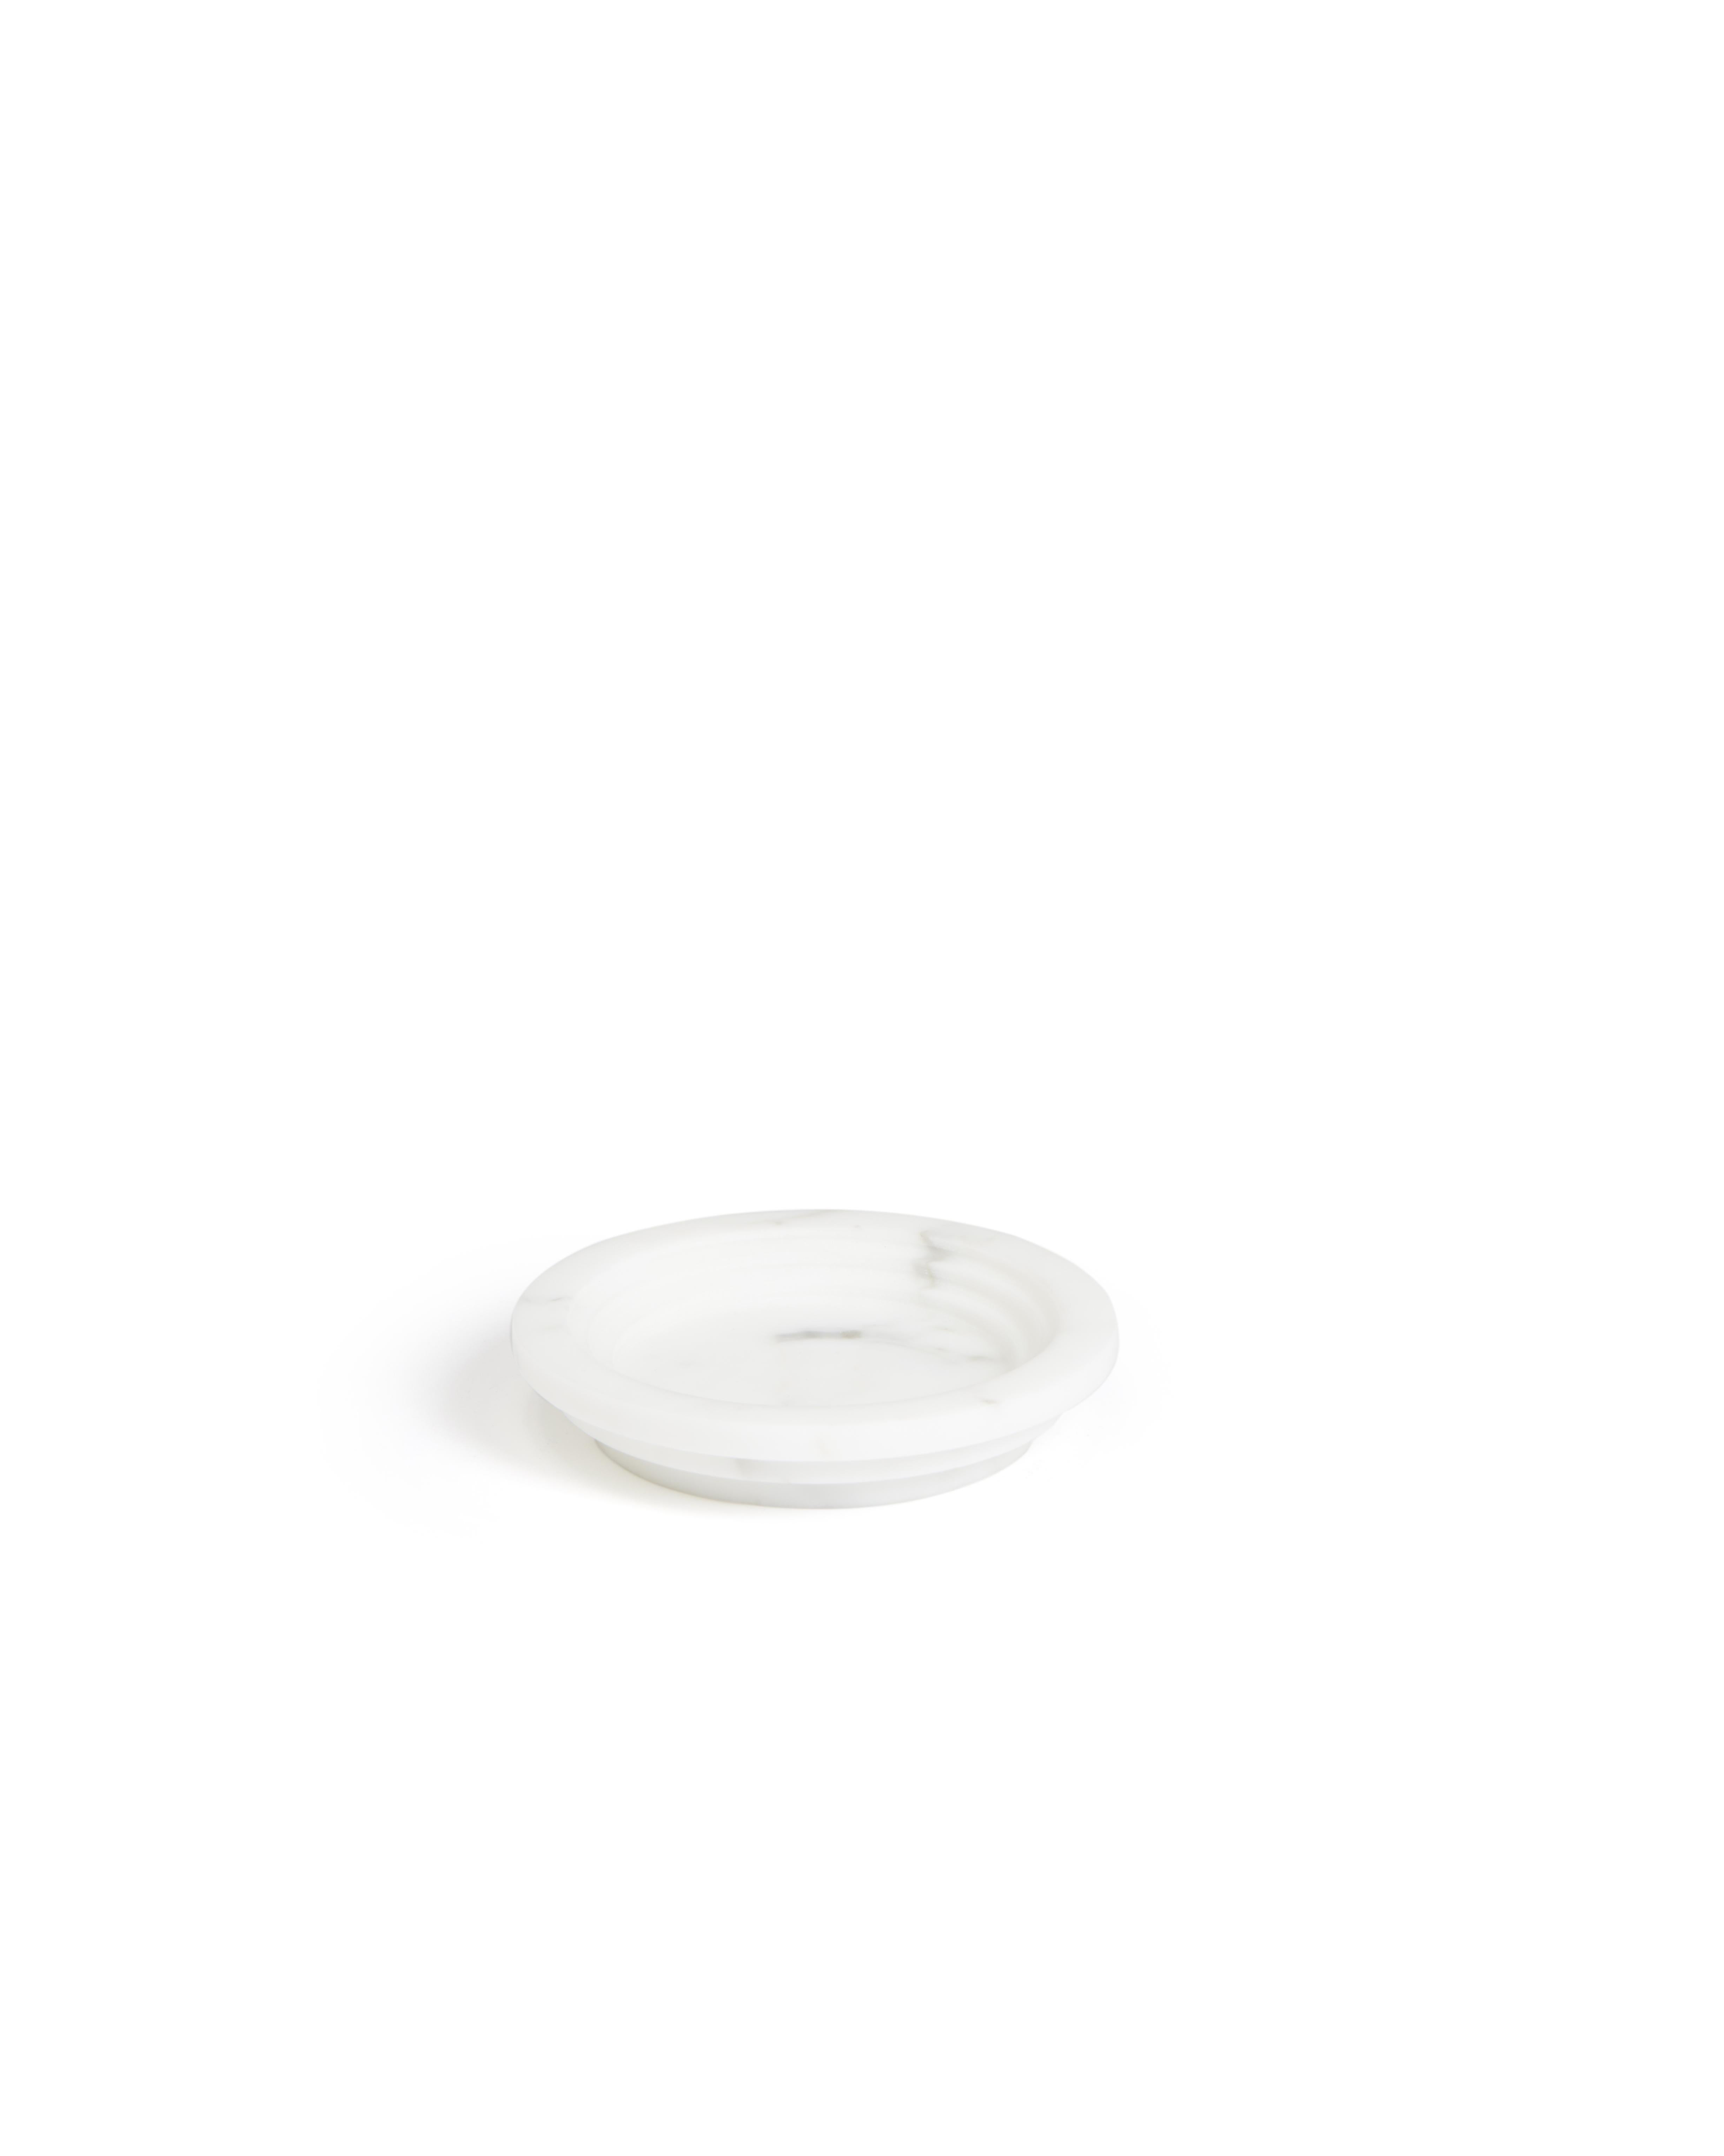 Guggenheim round ashtray by Michele Chiossi
Dimensions: 16 x 16 x 3 cm
Materials: Bianco Michelangelo marble

His research is defined by the ongoing analysis of the mood that marks our daily lives, which he manifests through original still-lives